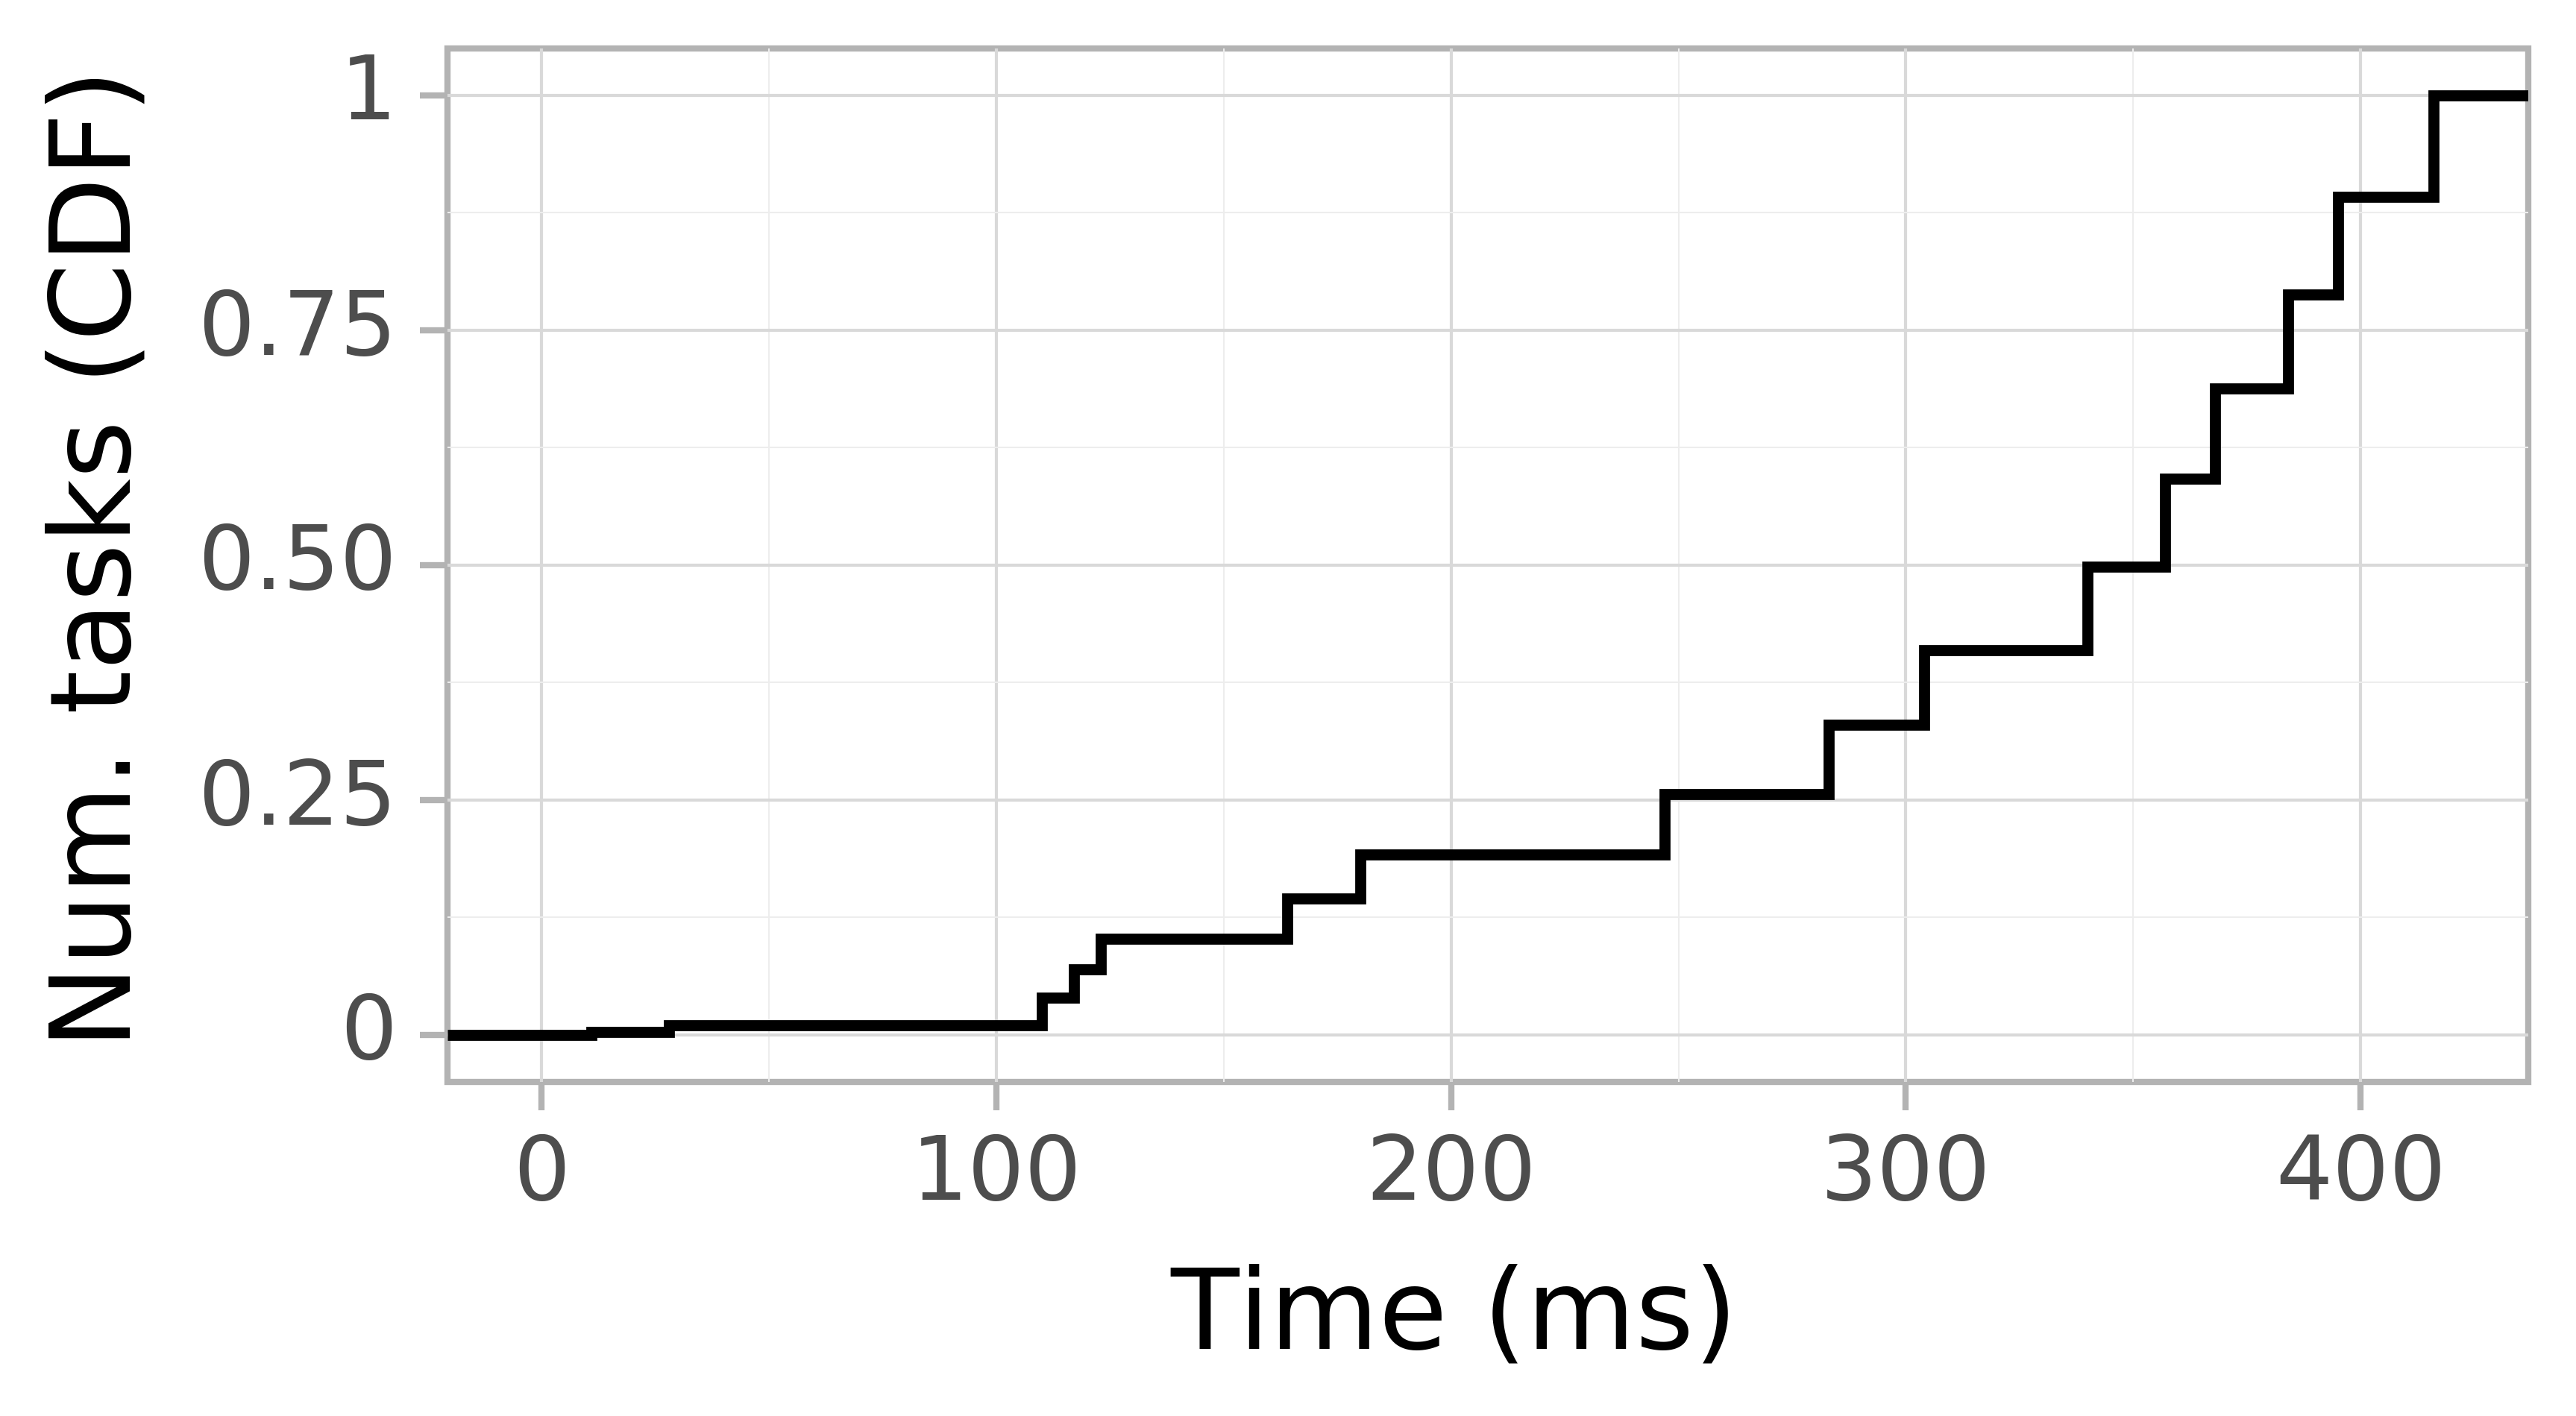 Task arrival CDF graph for the Pegasus_P8 trace.